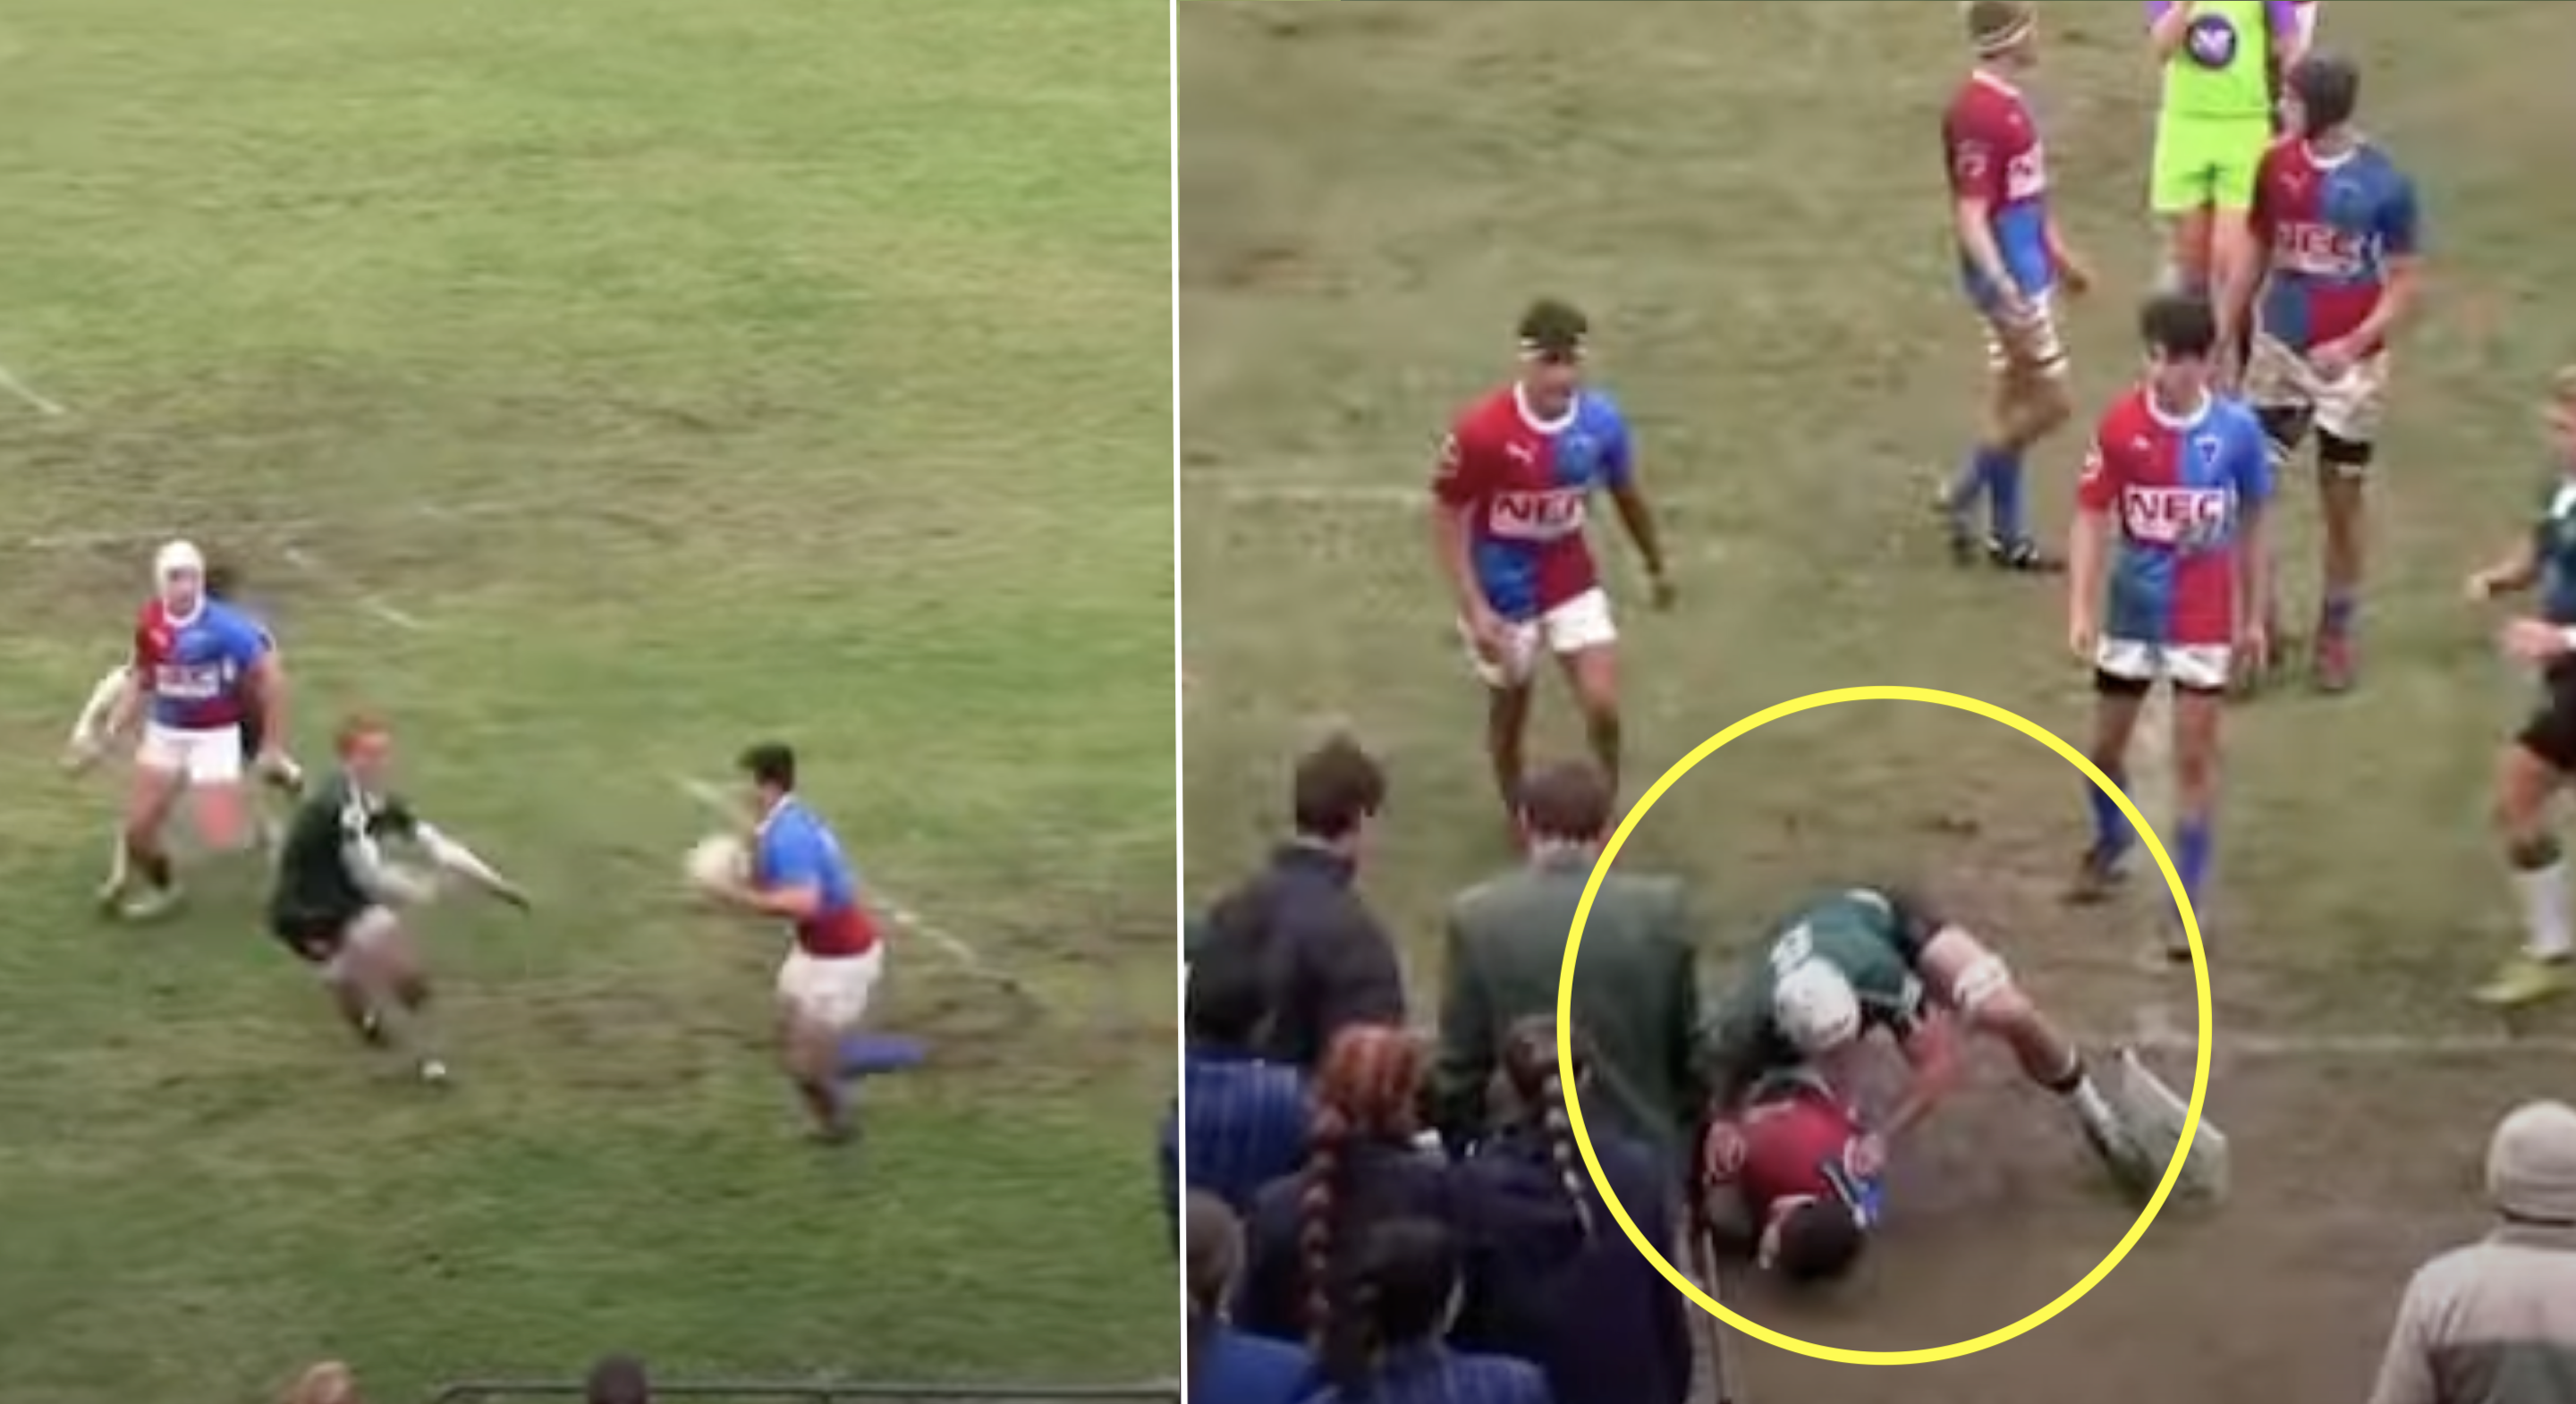 Scrum-half regrets running into lock and flanker in South African schools match